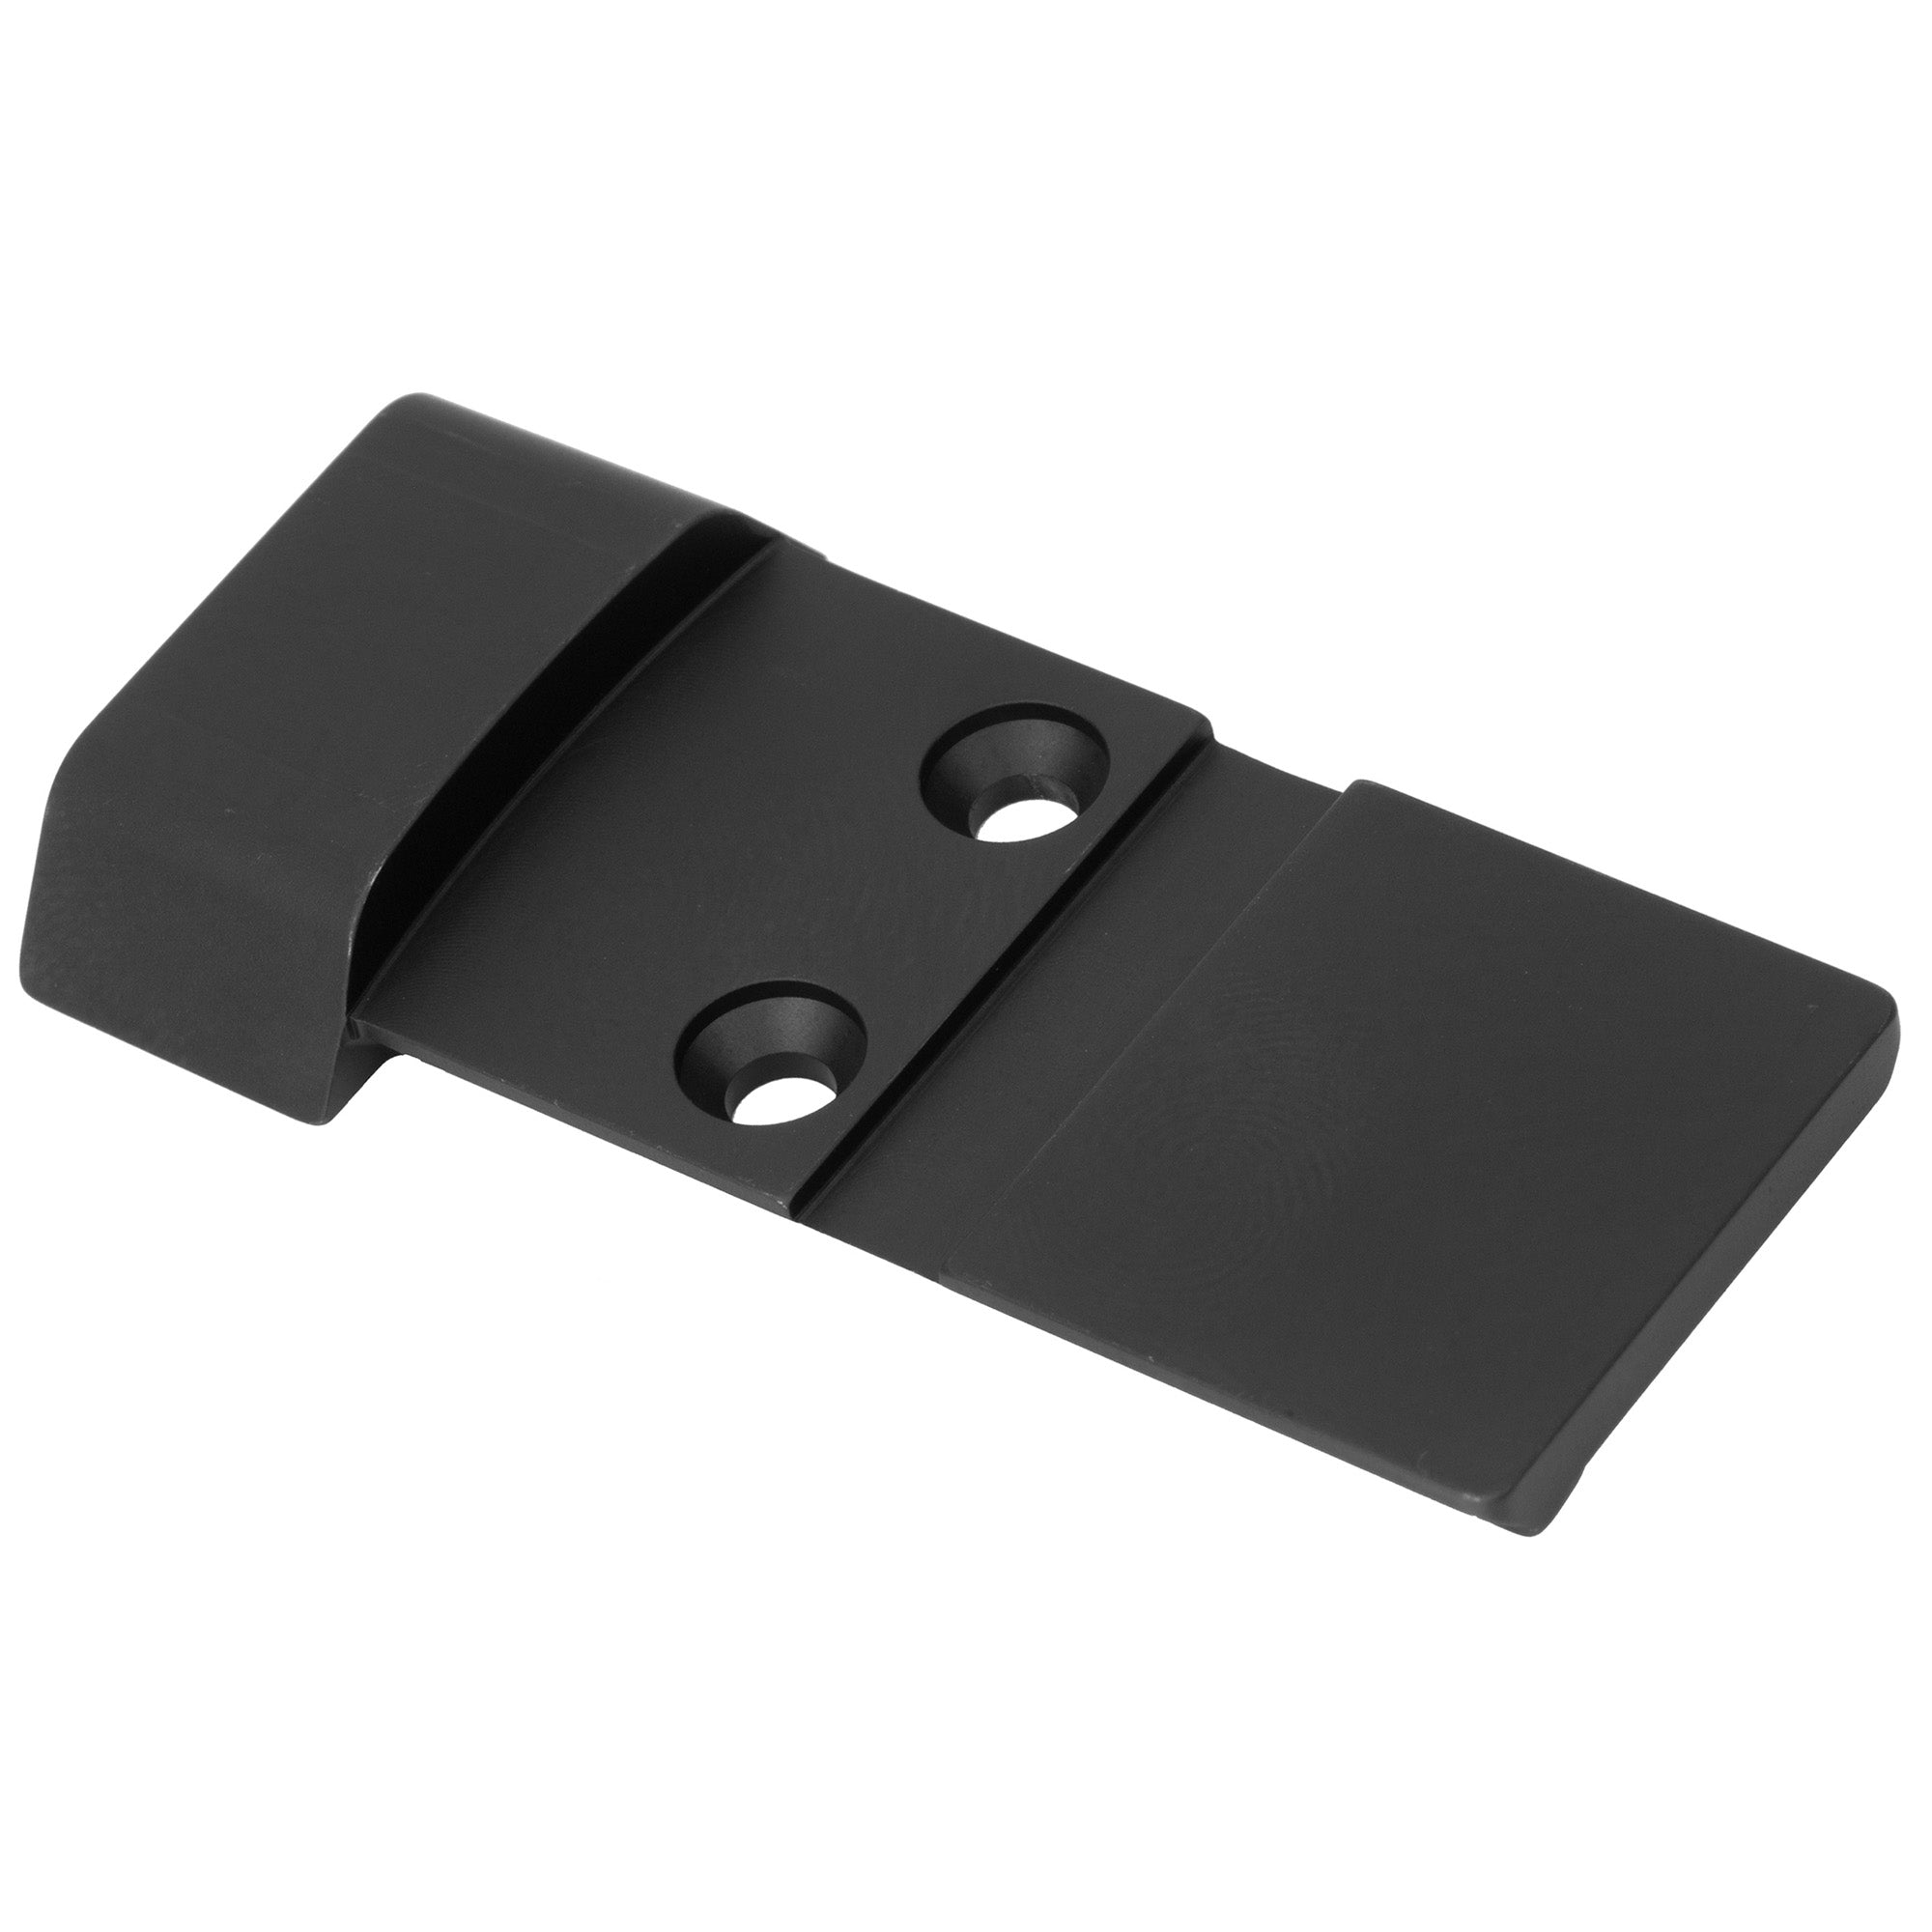 CZ P10 to 509T Adapter Plate - Holosun